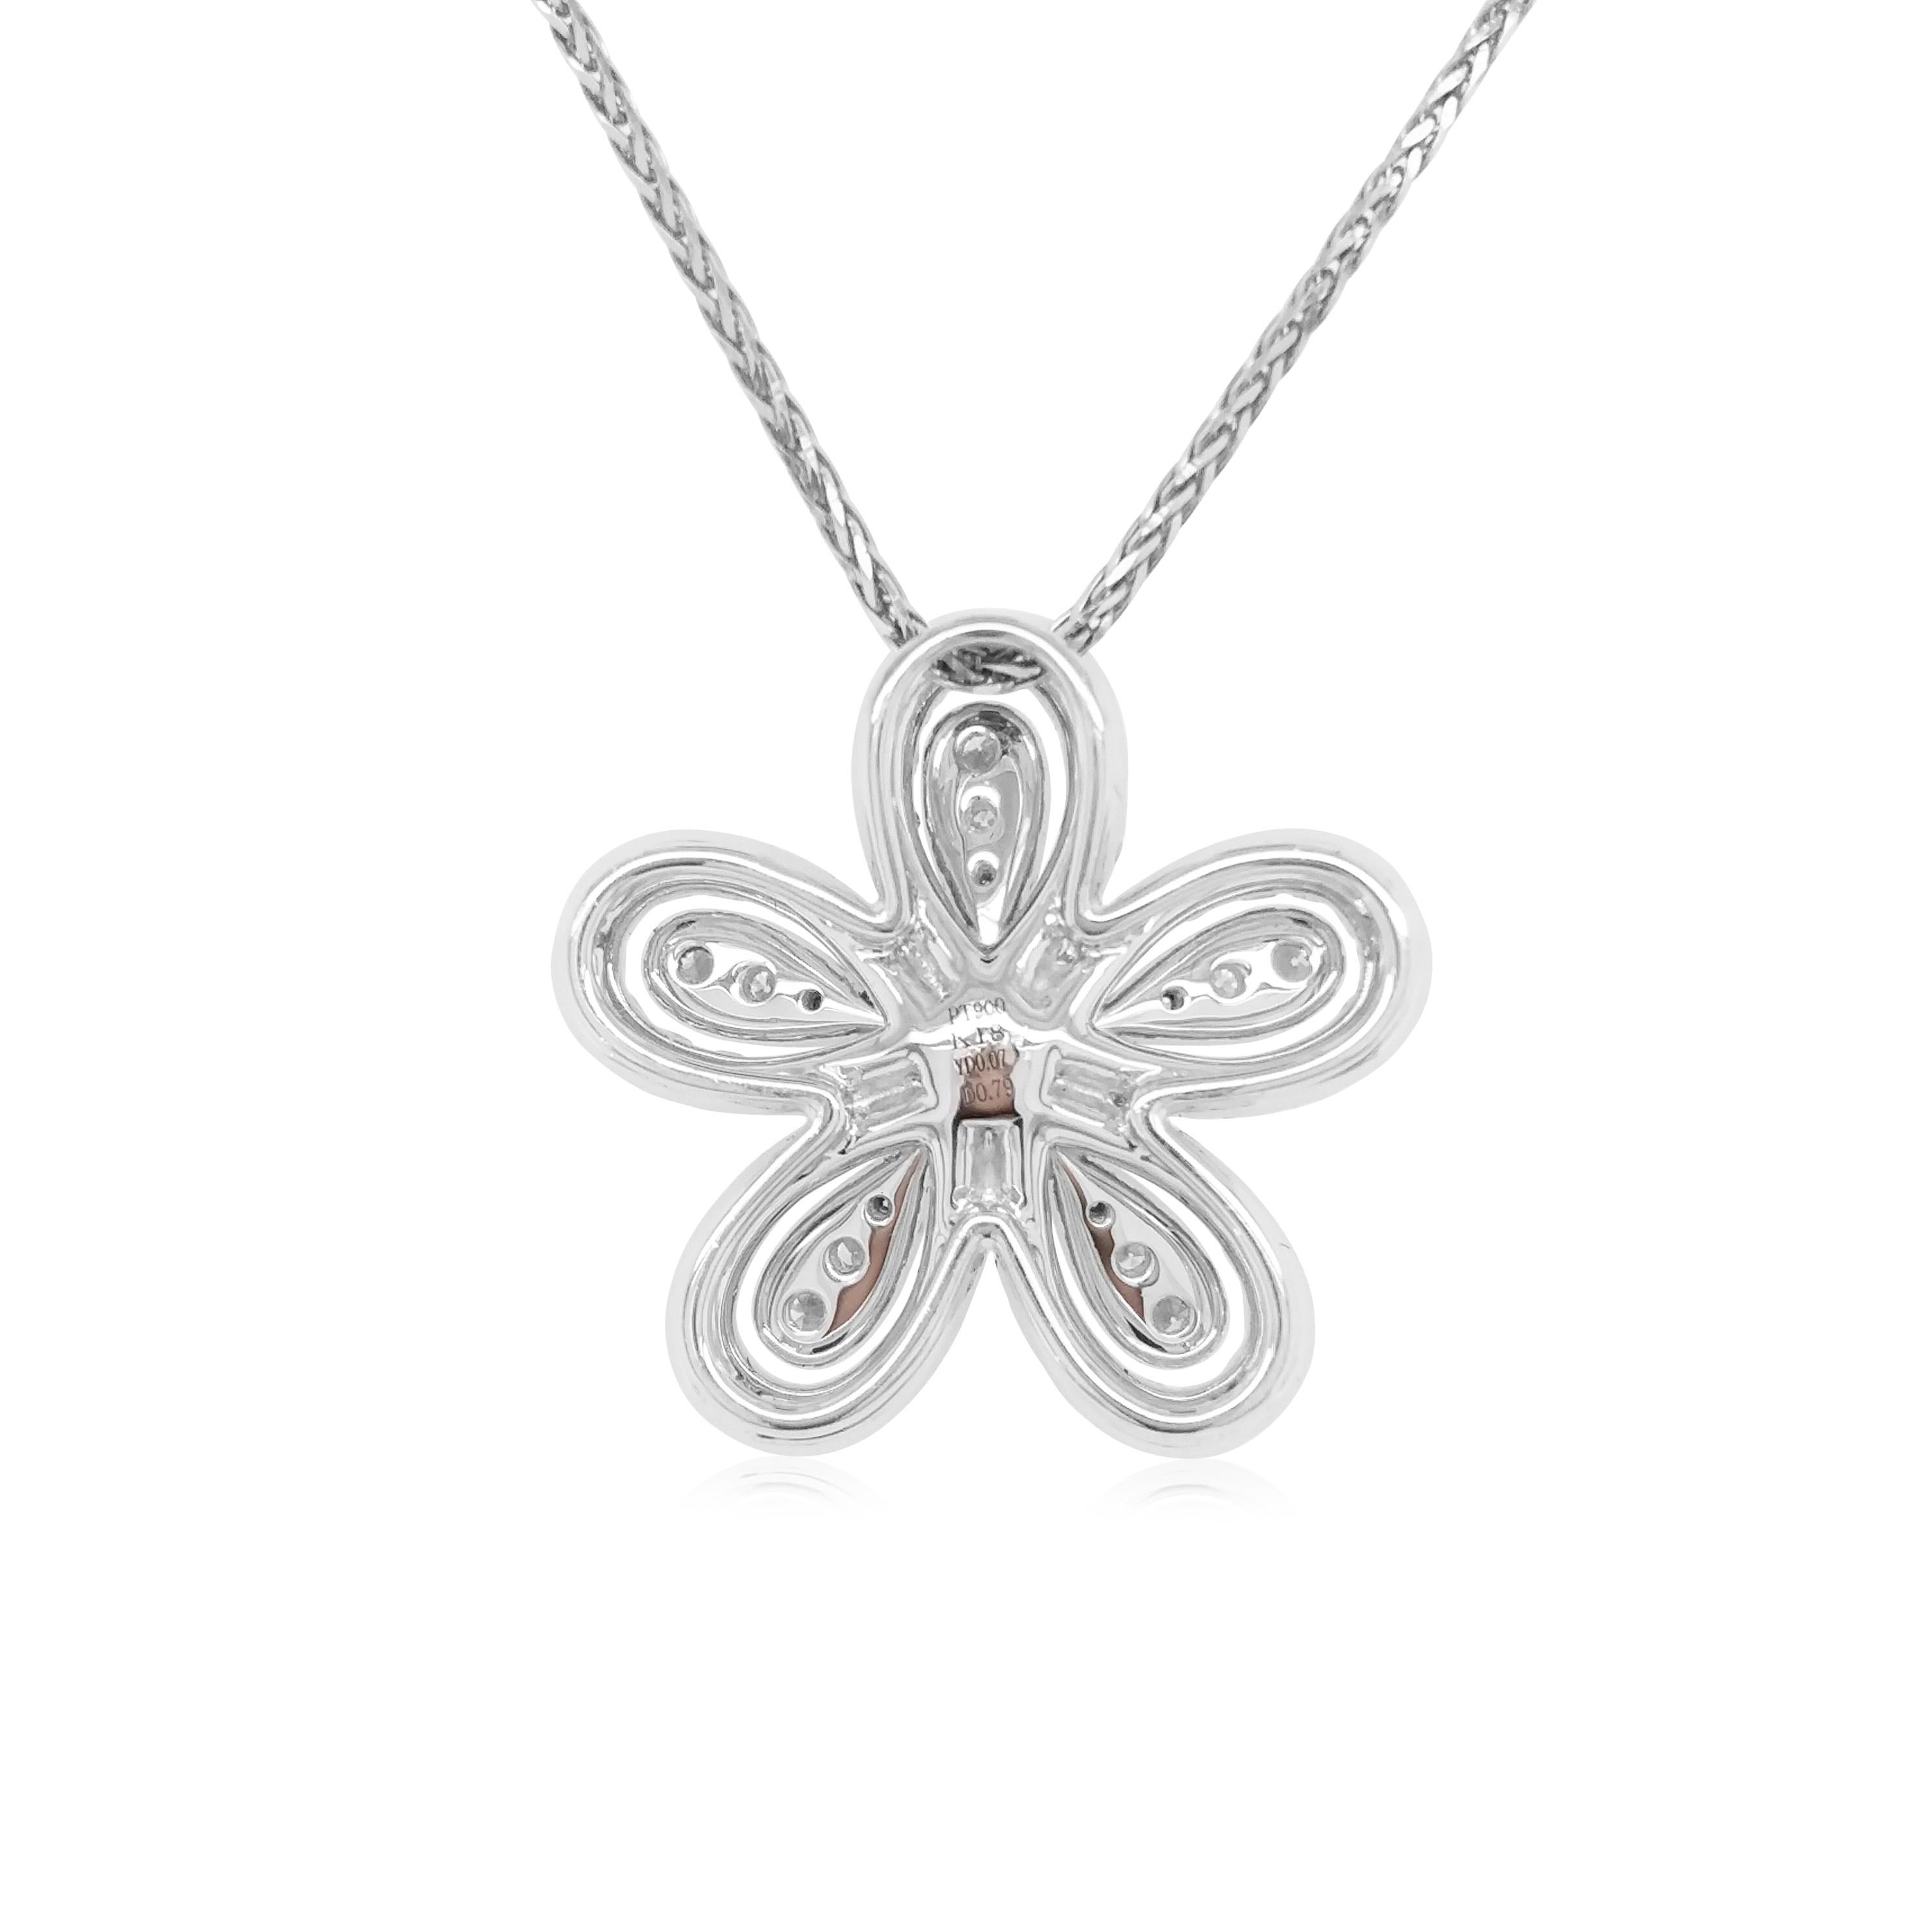 This unique flower shaped pendant features striking Yellow diamonds at the heart of the design. The rich colour of these diamonds is complimented perfectly by the delicate platinum floral design which completed by a combination of glistening white